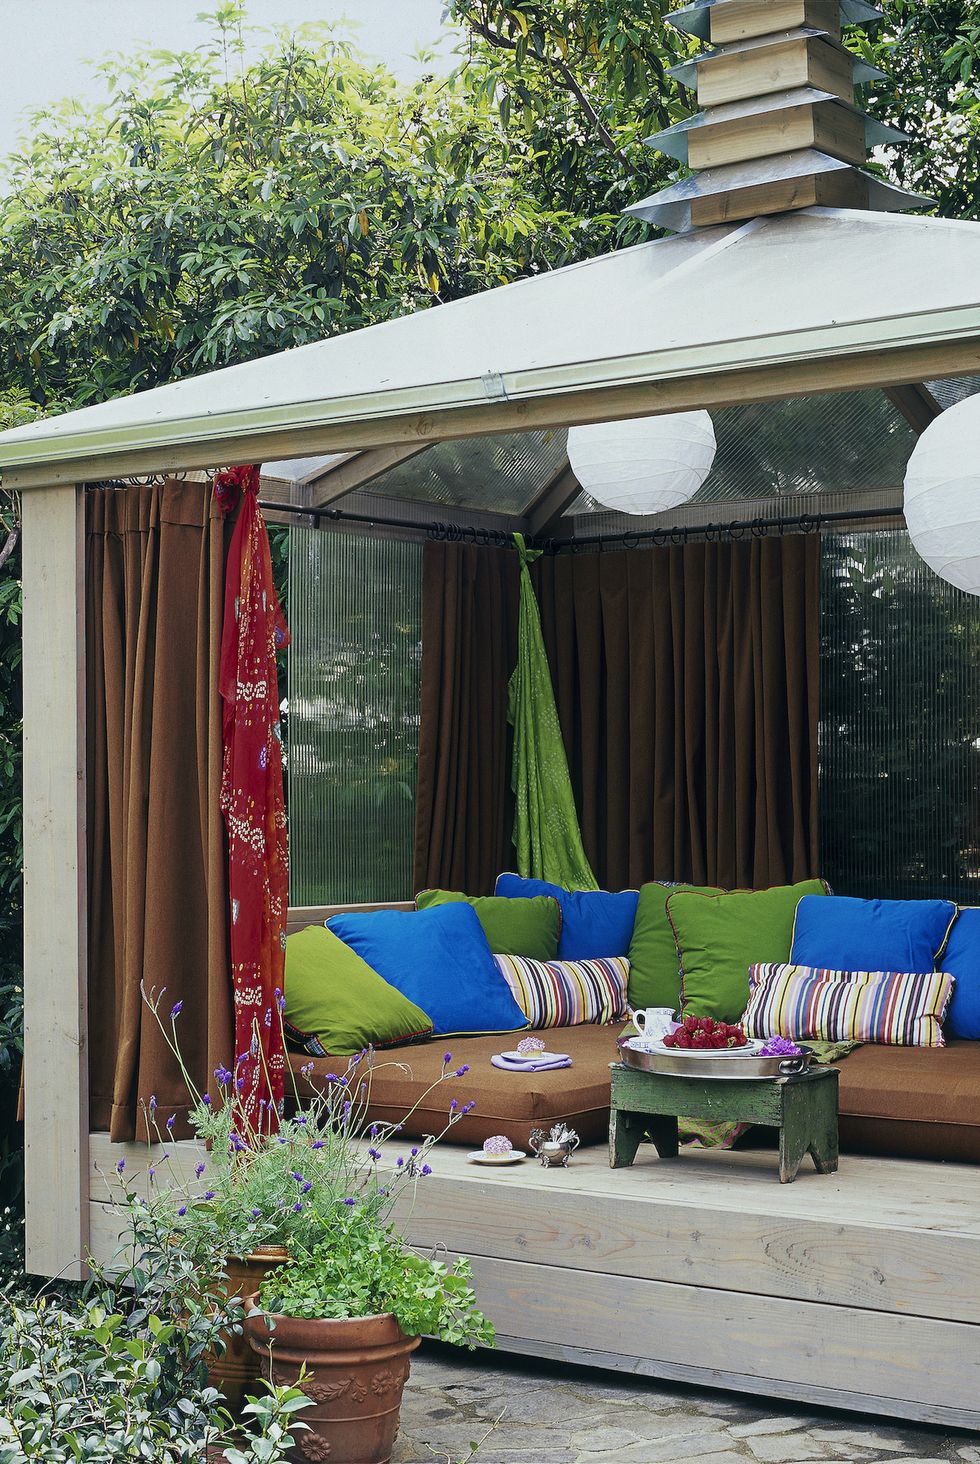 25 Best Patio Cover Ideas - Smart Ways to Cover Your Patio